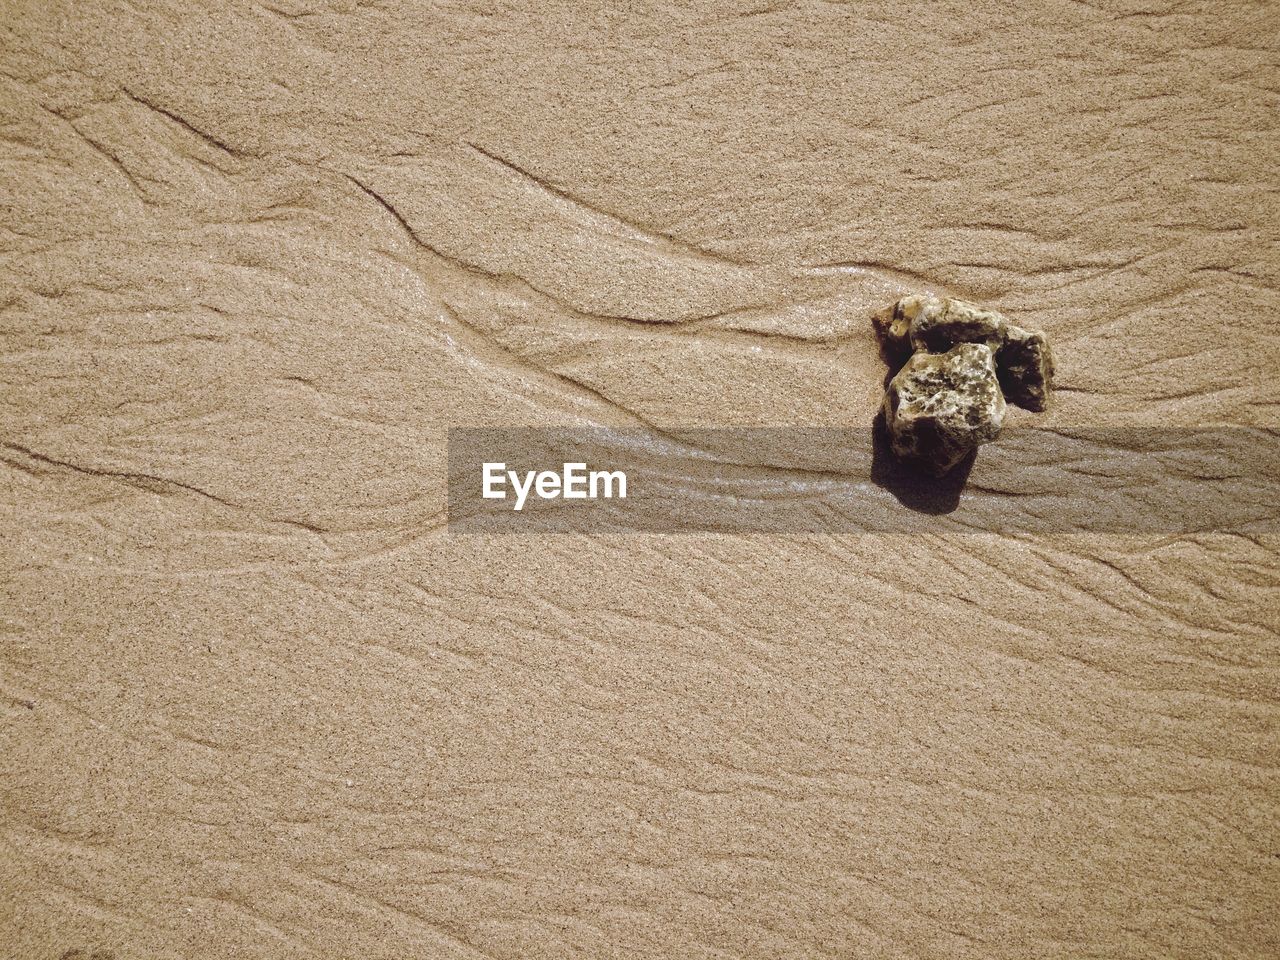 HIGH ANGLE VIEW OF A HORSE ON SAND